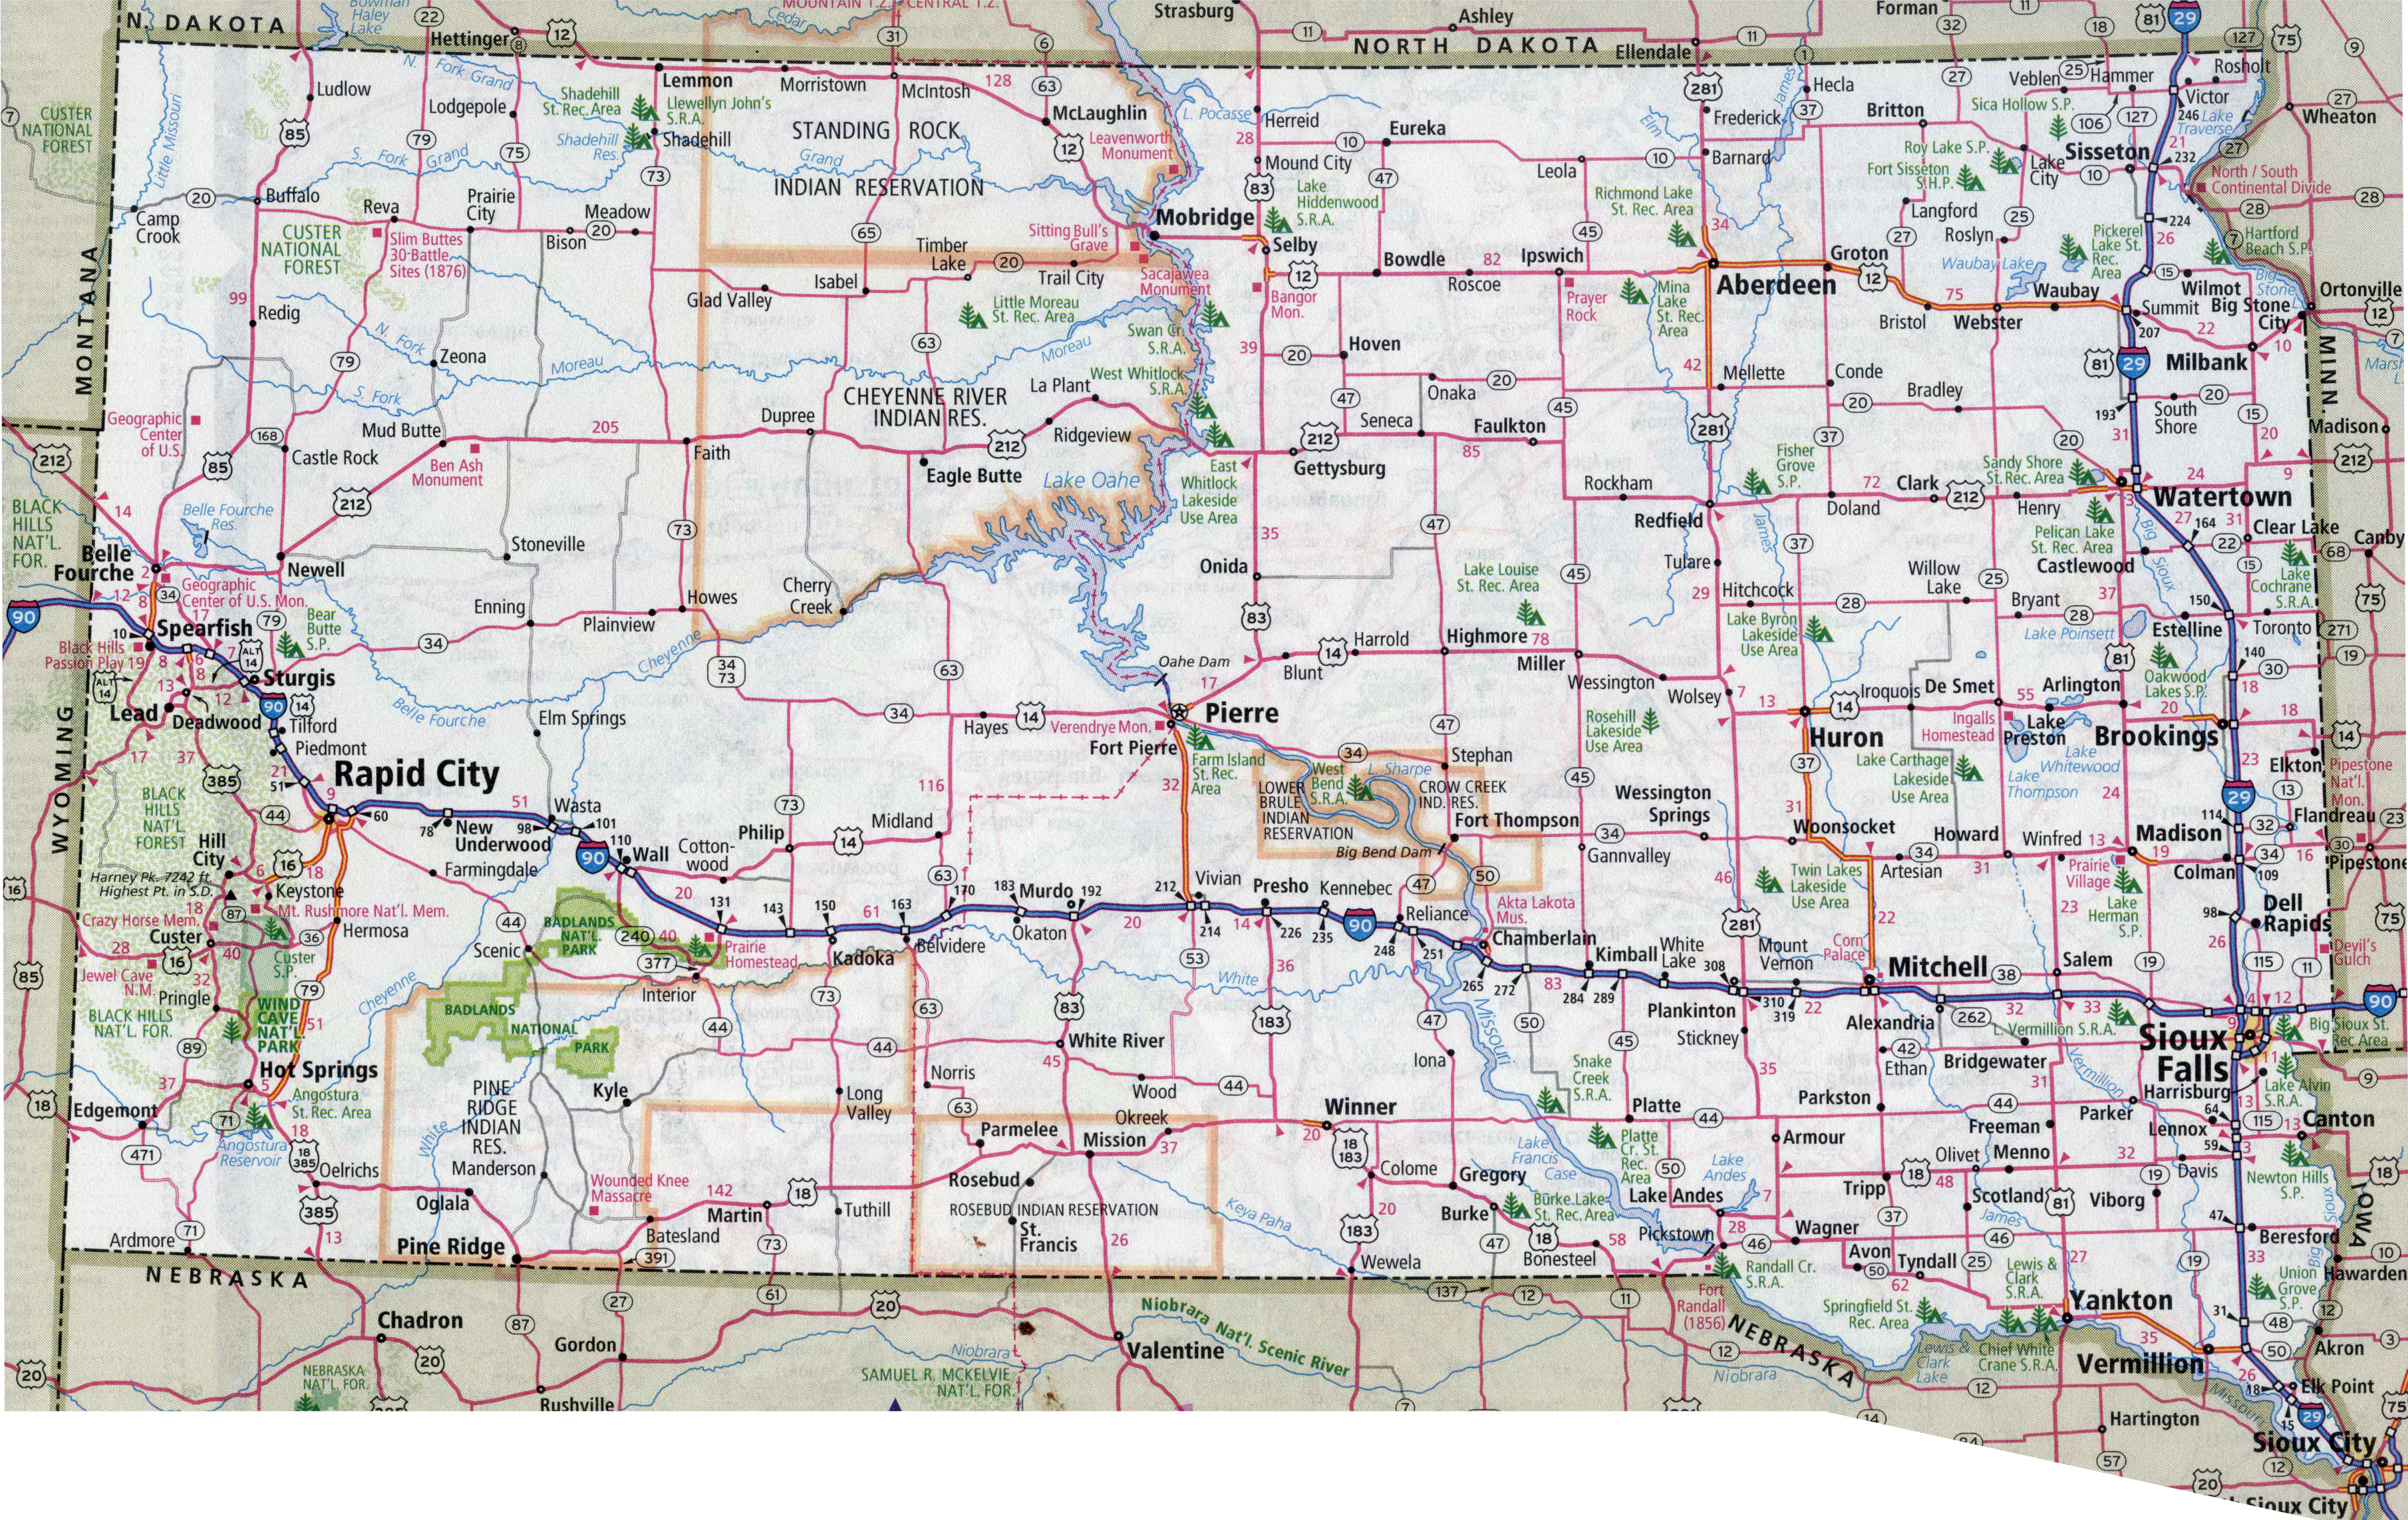 Large Detailed Roads And Highways Map Of South Dakota State With All Cities South Dakota State Usa Maps Of The Usa Maps Collection Of The United States Of America